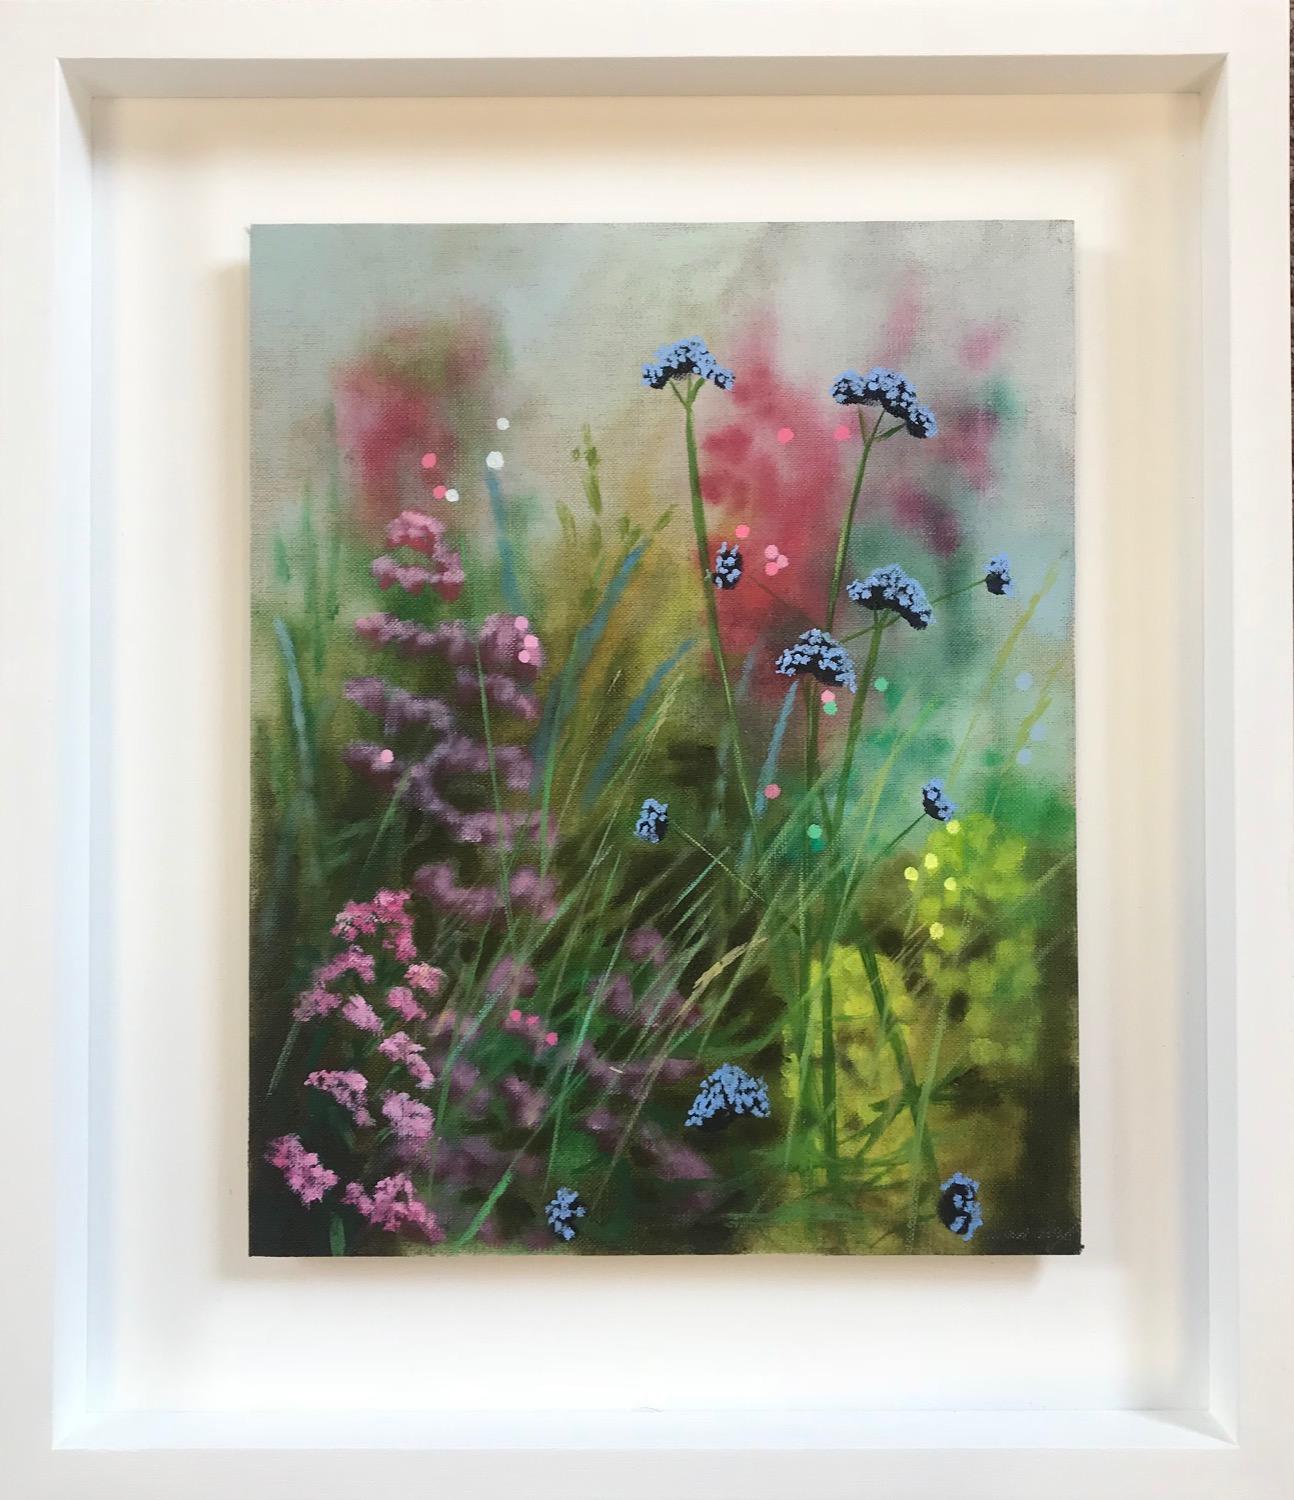 Island Garden Border III, Floral Painting on Board by Dylan Lloyd for Sale For Sale 5